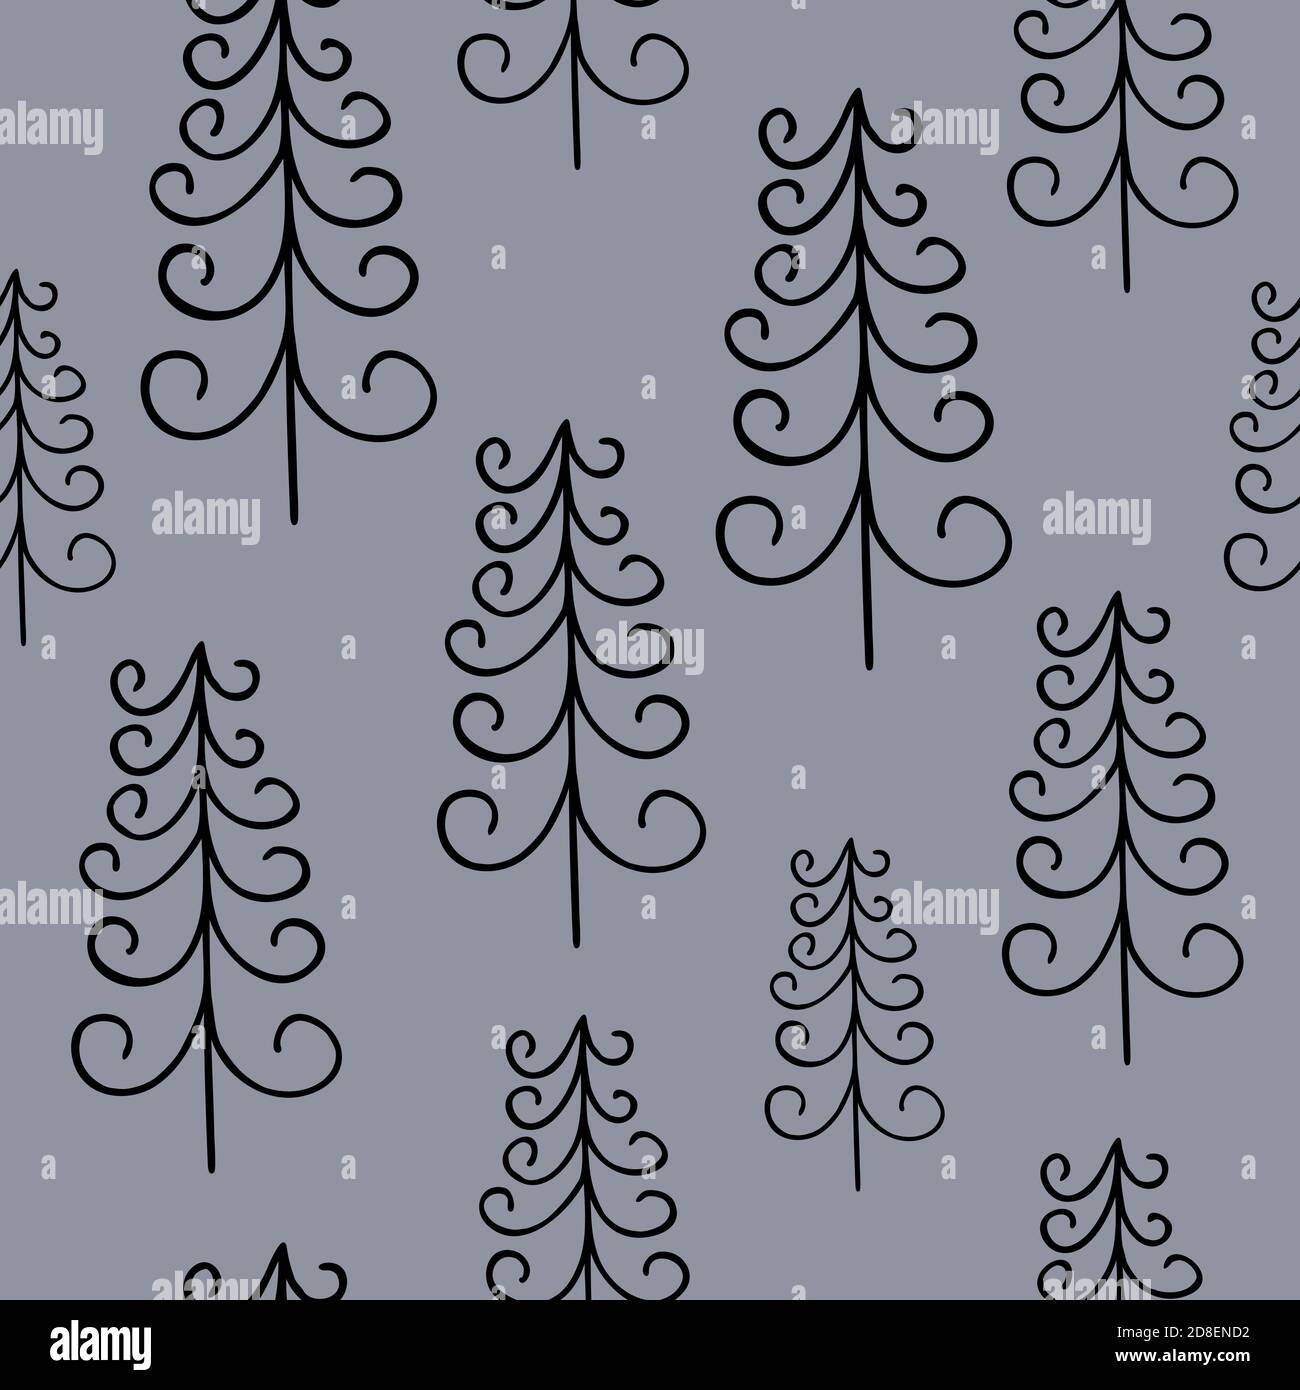 https://c8.alamy.com/comp/2D8END2/christmas-tree-simple-vector-seamless-pattern-in-cute-cartoon-style-decorative-forest-fir-tree-for-textile-gift-paper-family-gatherings-winter-holidays-design-wintertime-festive-period-celebration-2D8END2.jpg